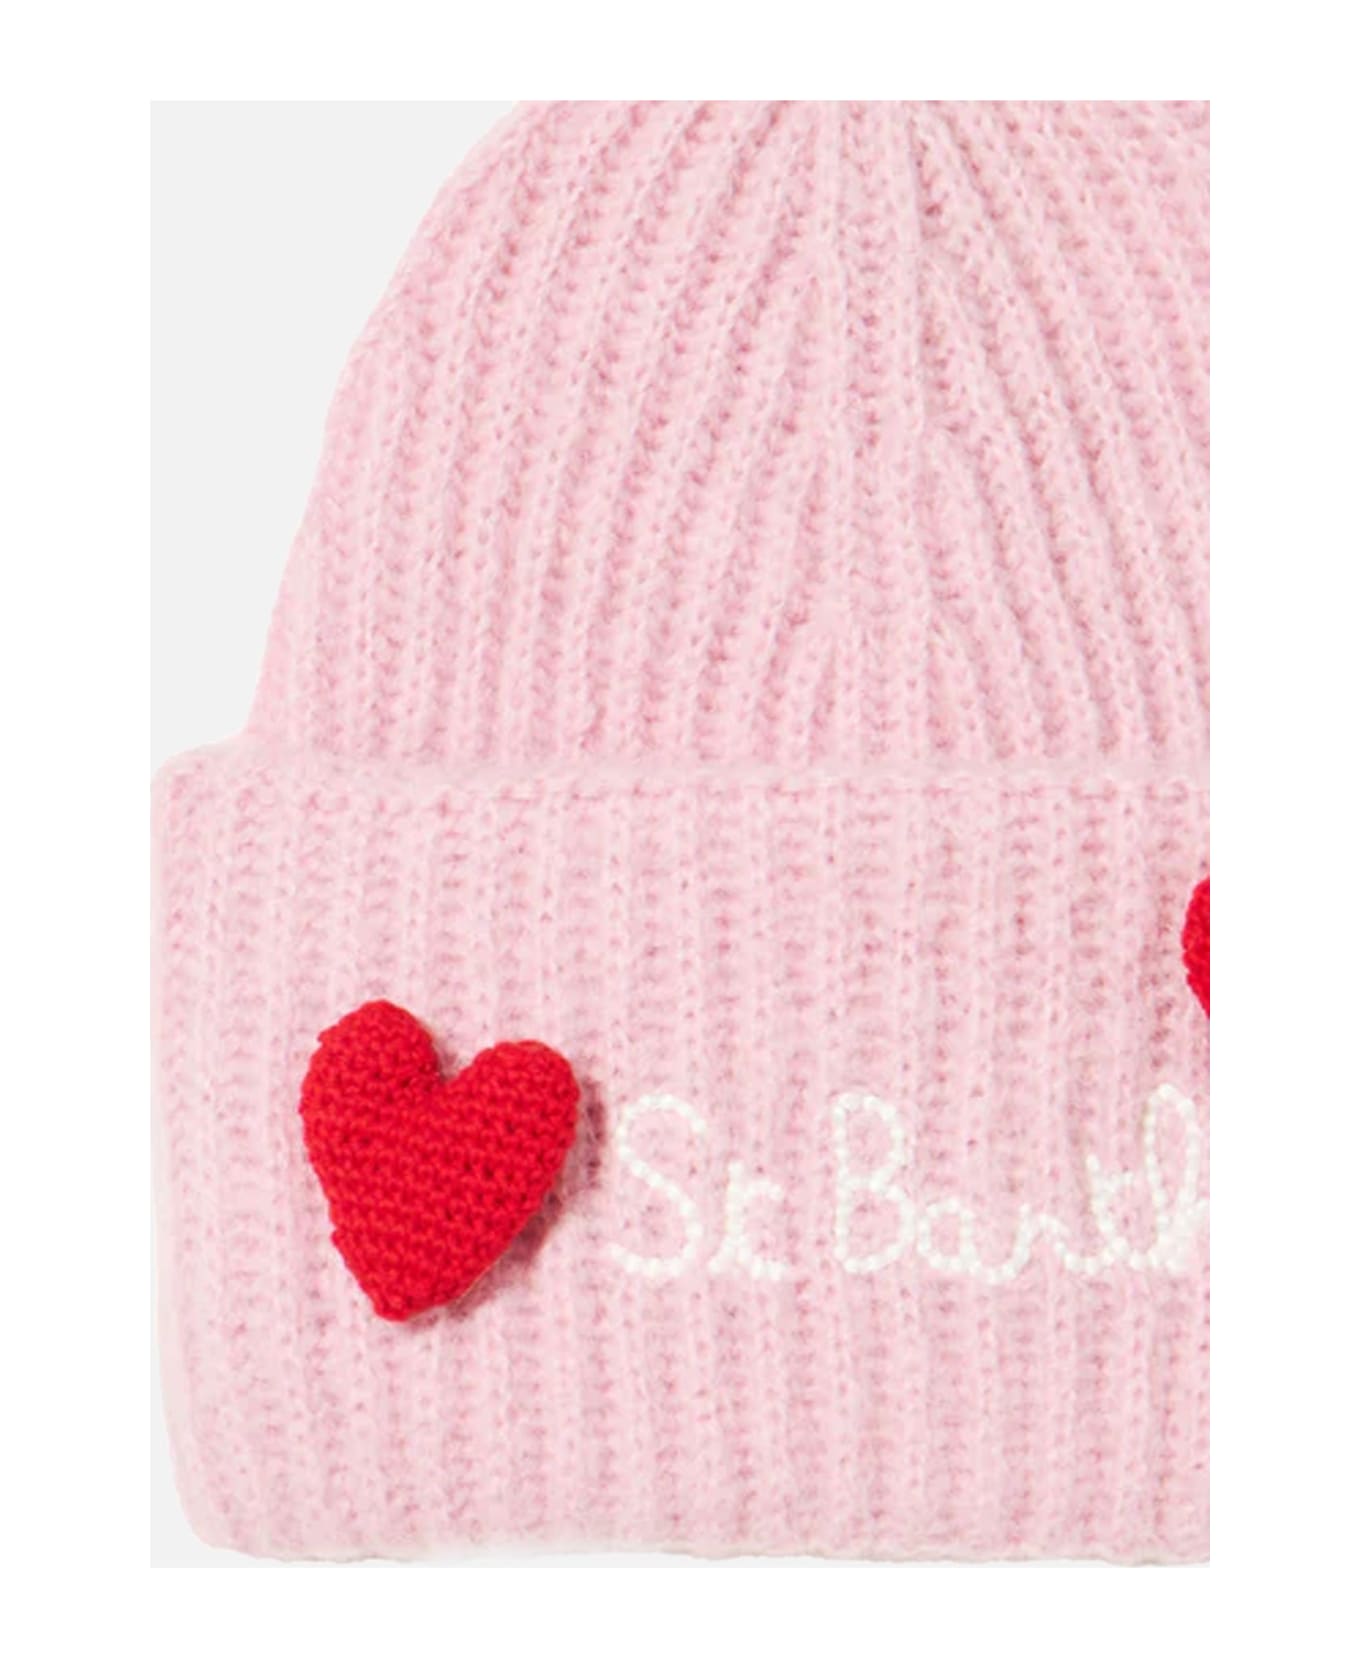 MC2 Saint Barth Woman Brushed And Ultra Soft Beanie With Hearts Appliqués - PINK 帽子